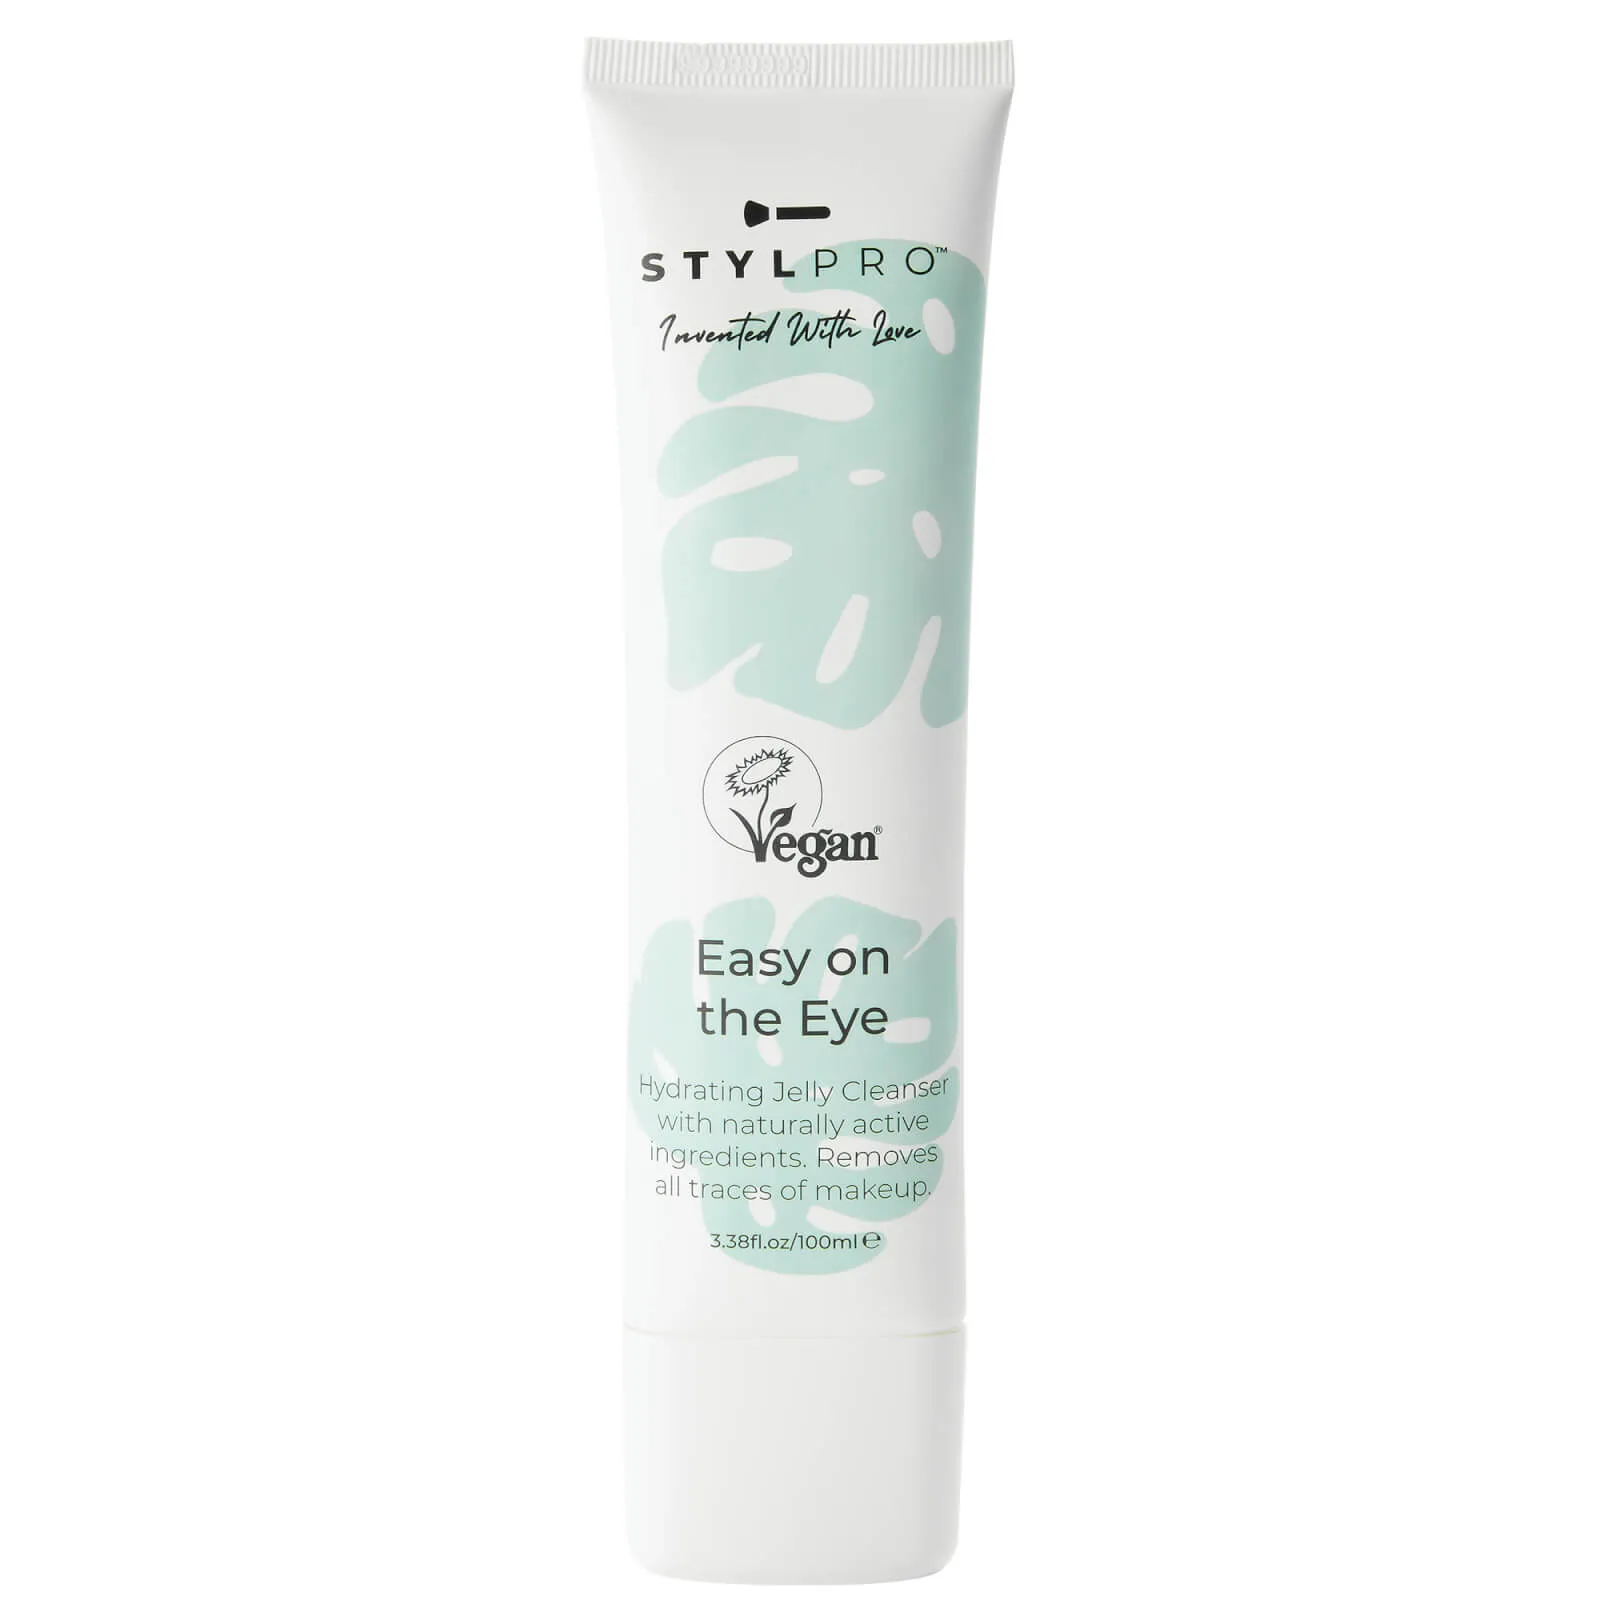  Easy on the Eye Jelly Cleanser and Cloth 100ml